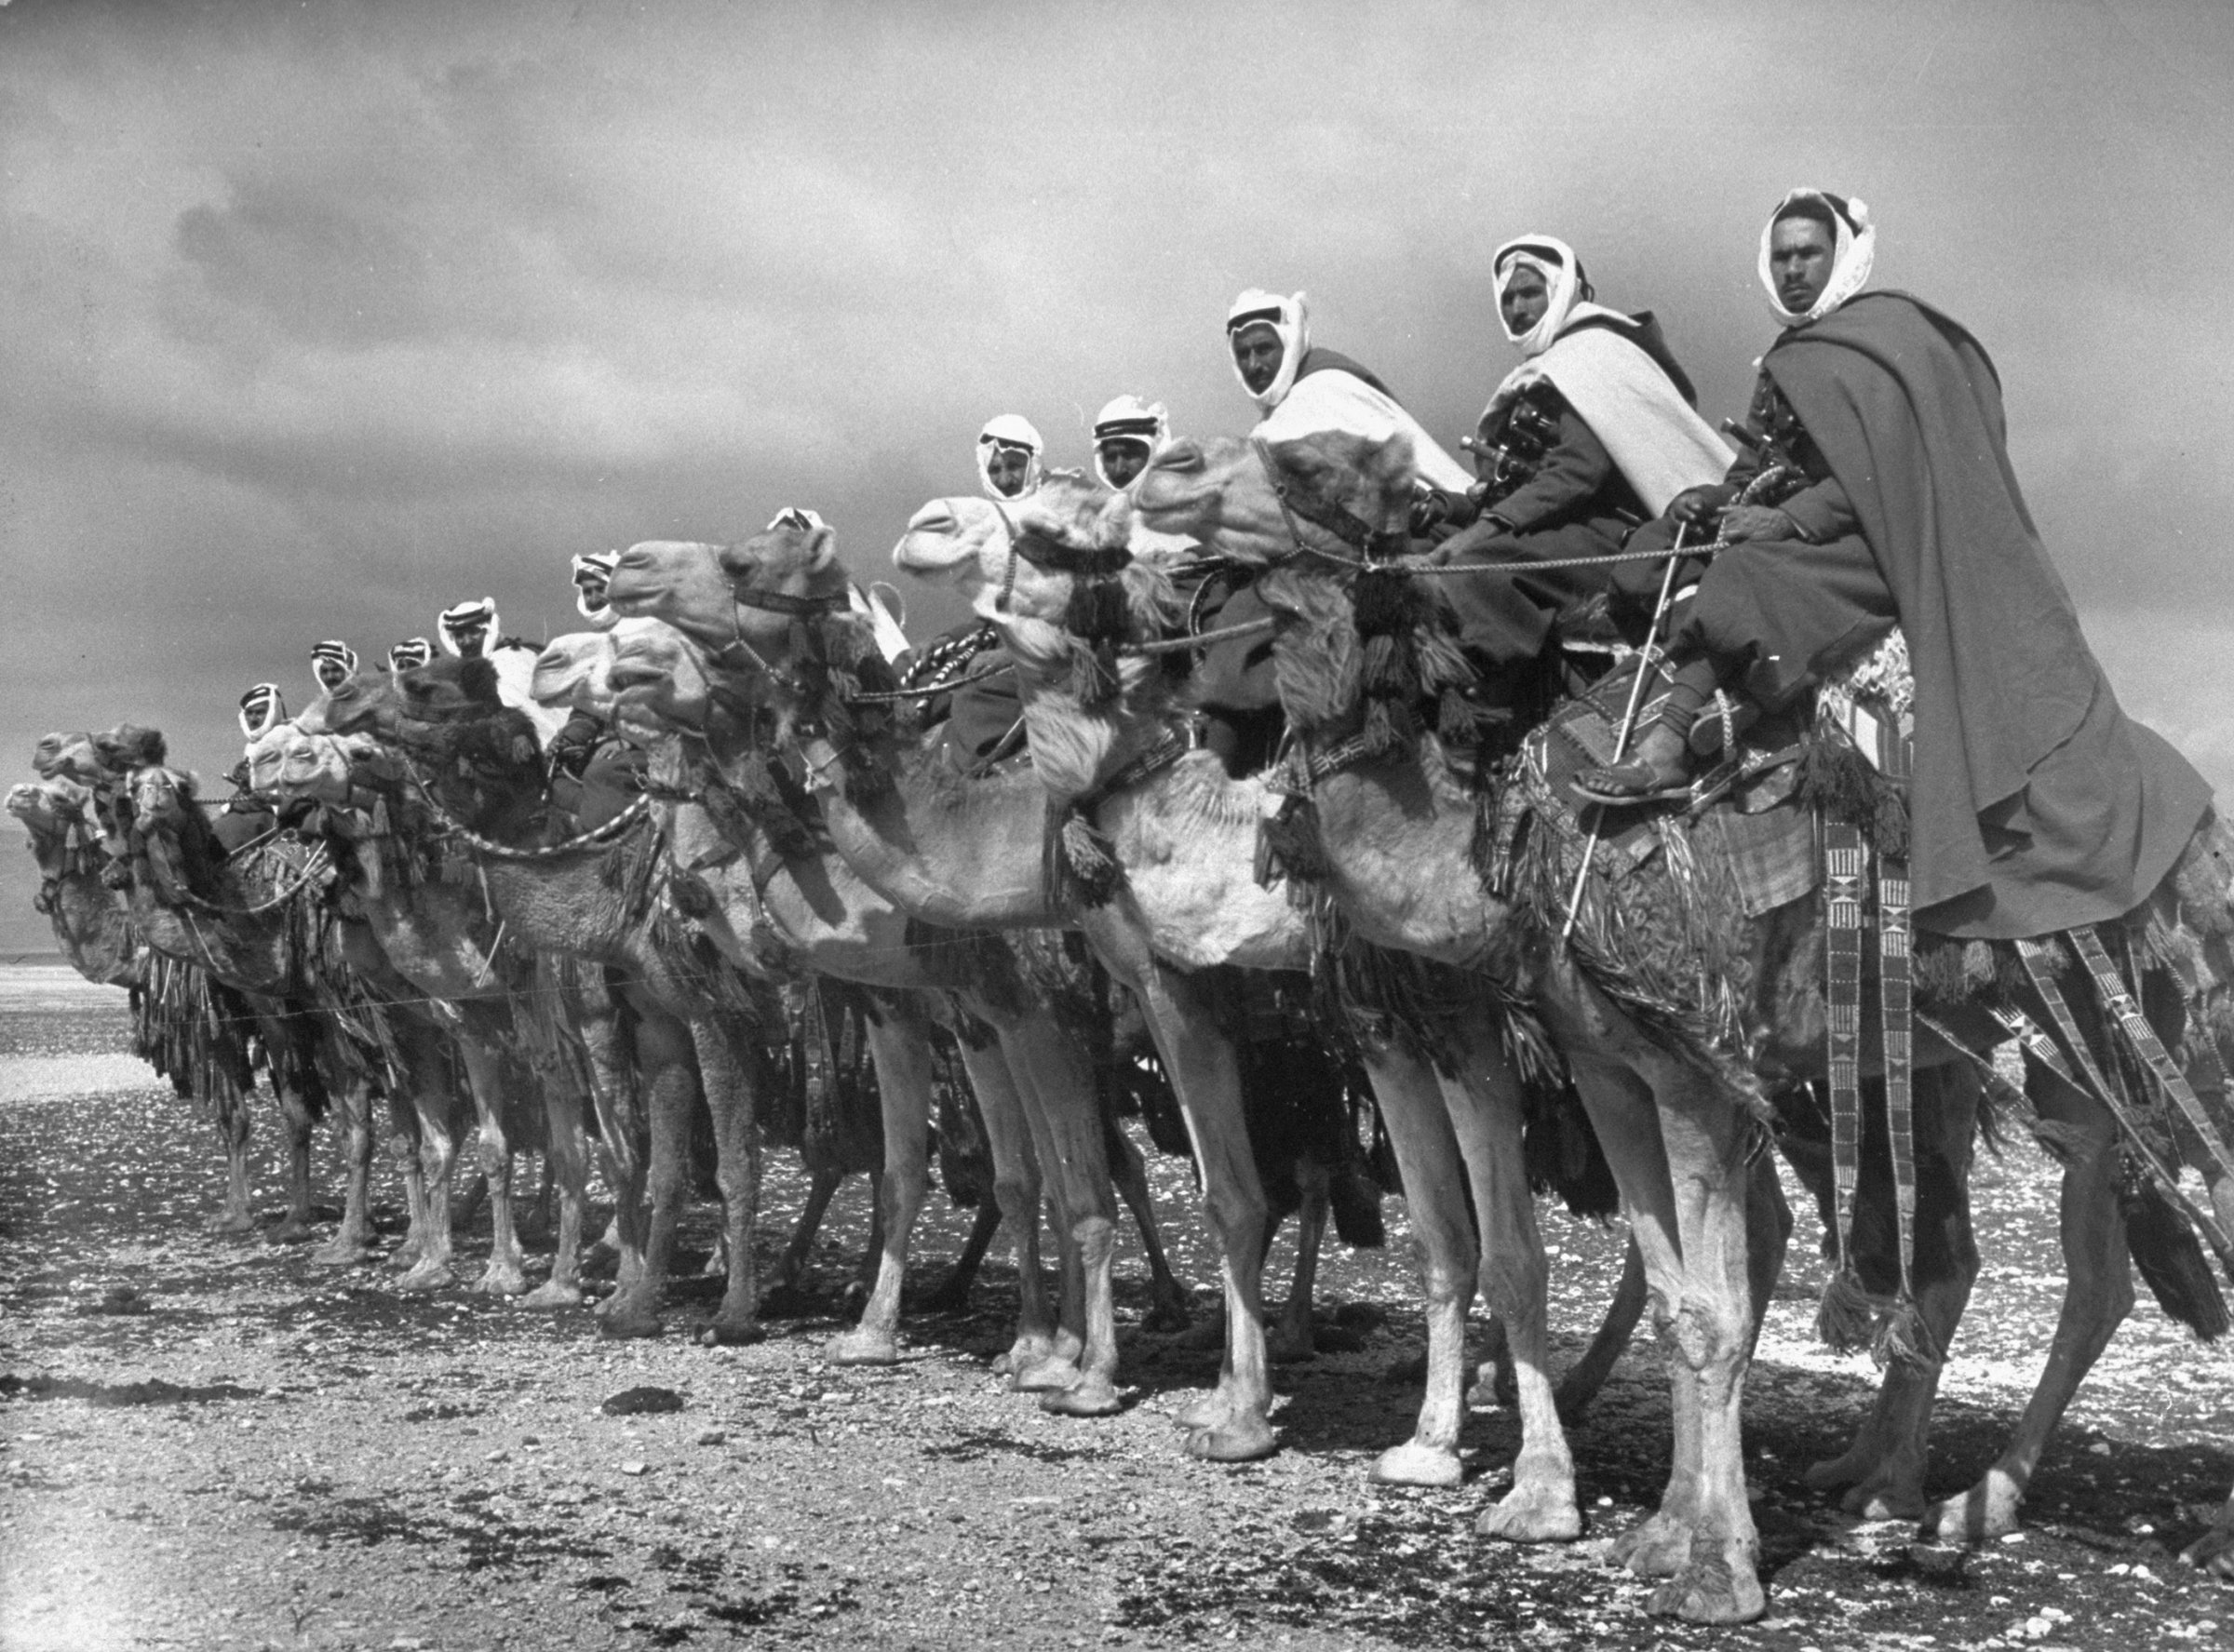 Members of the Bedouin "camel cavalry" near Damascus, Syria, 1940.